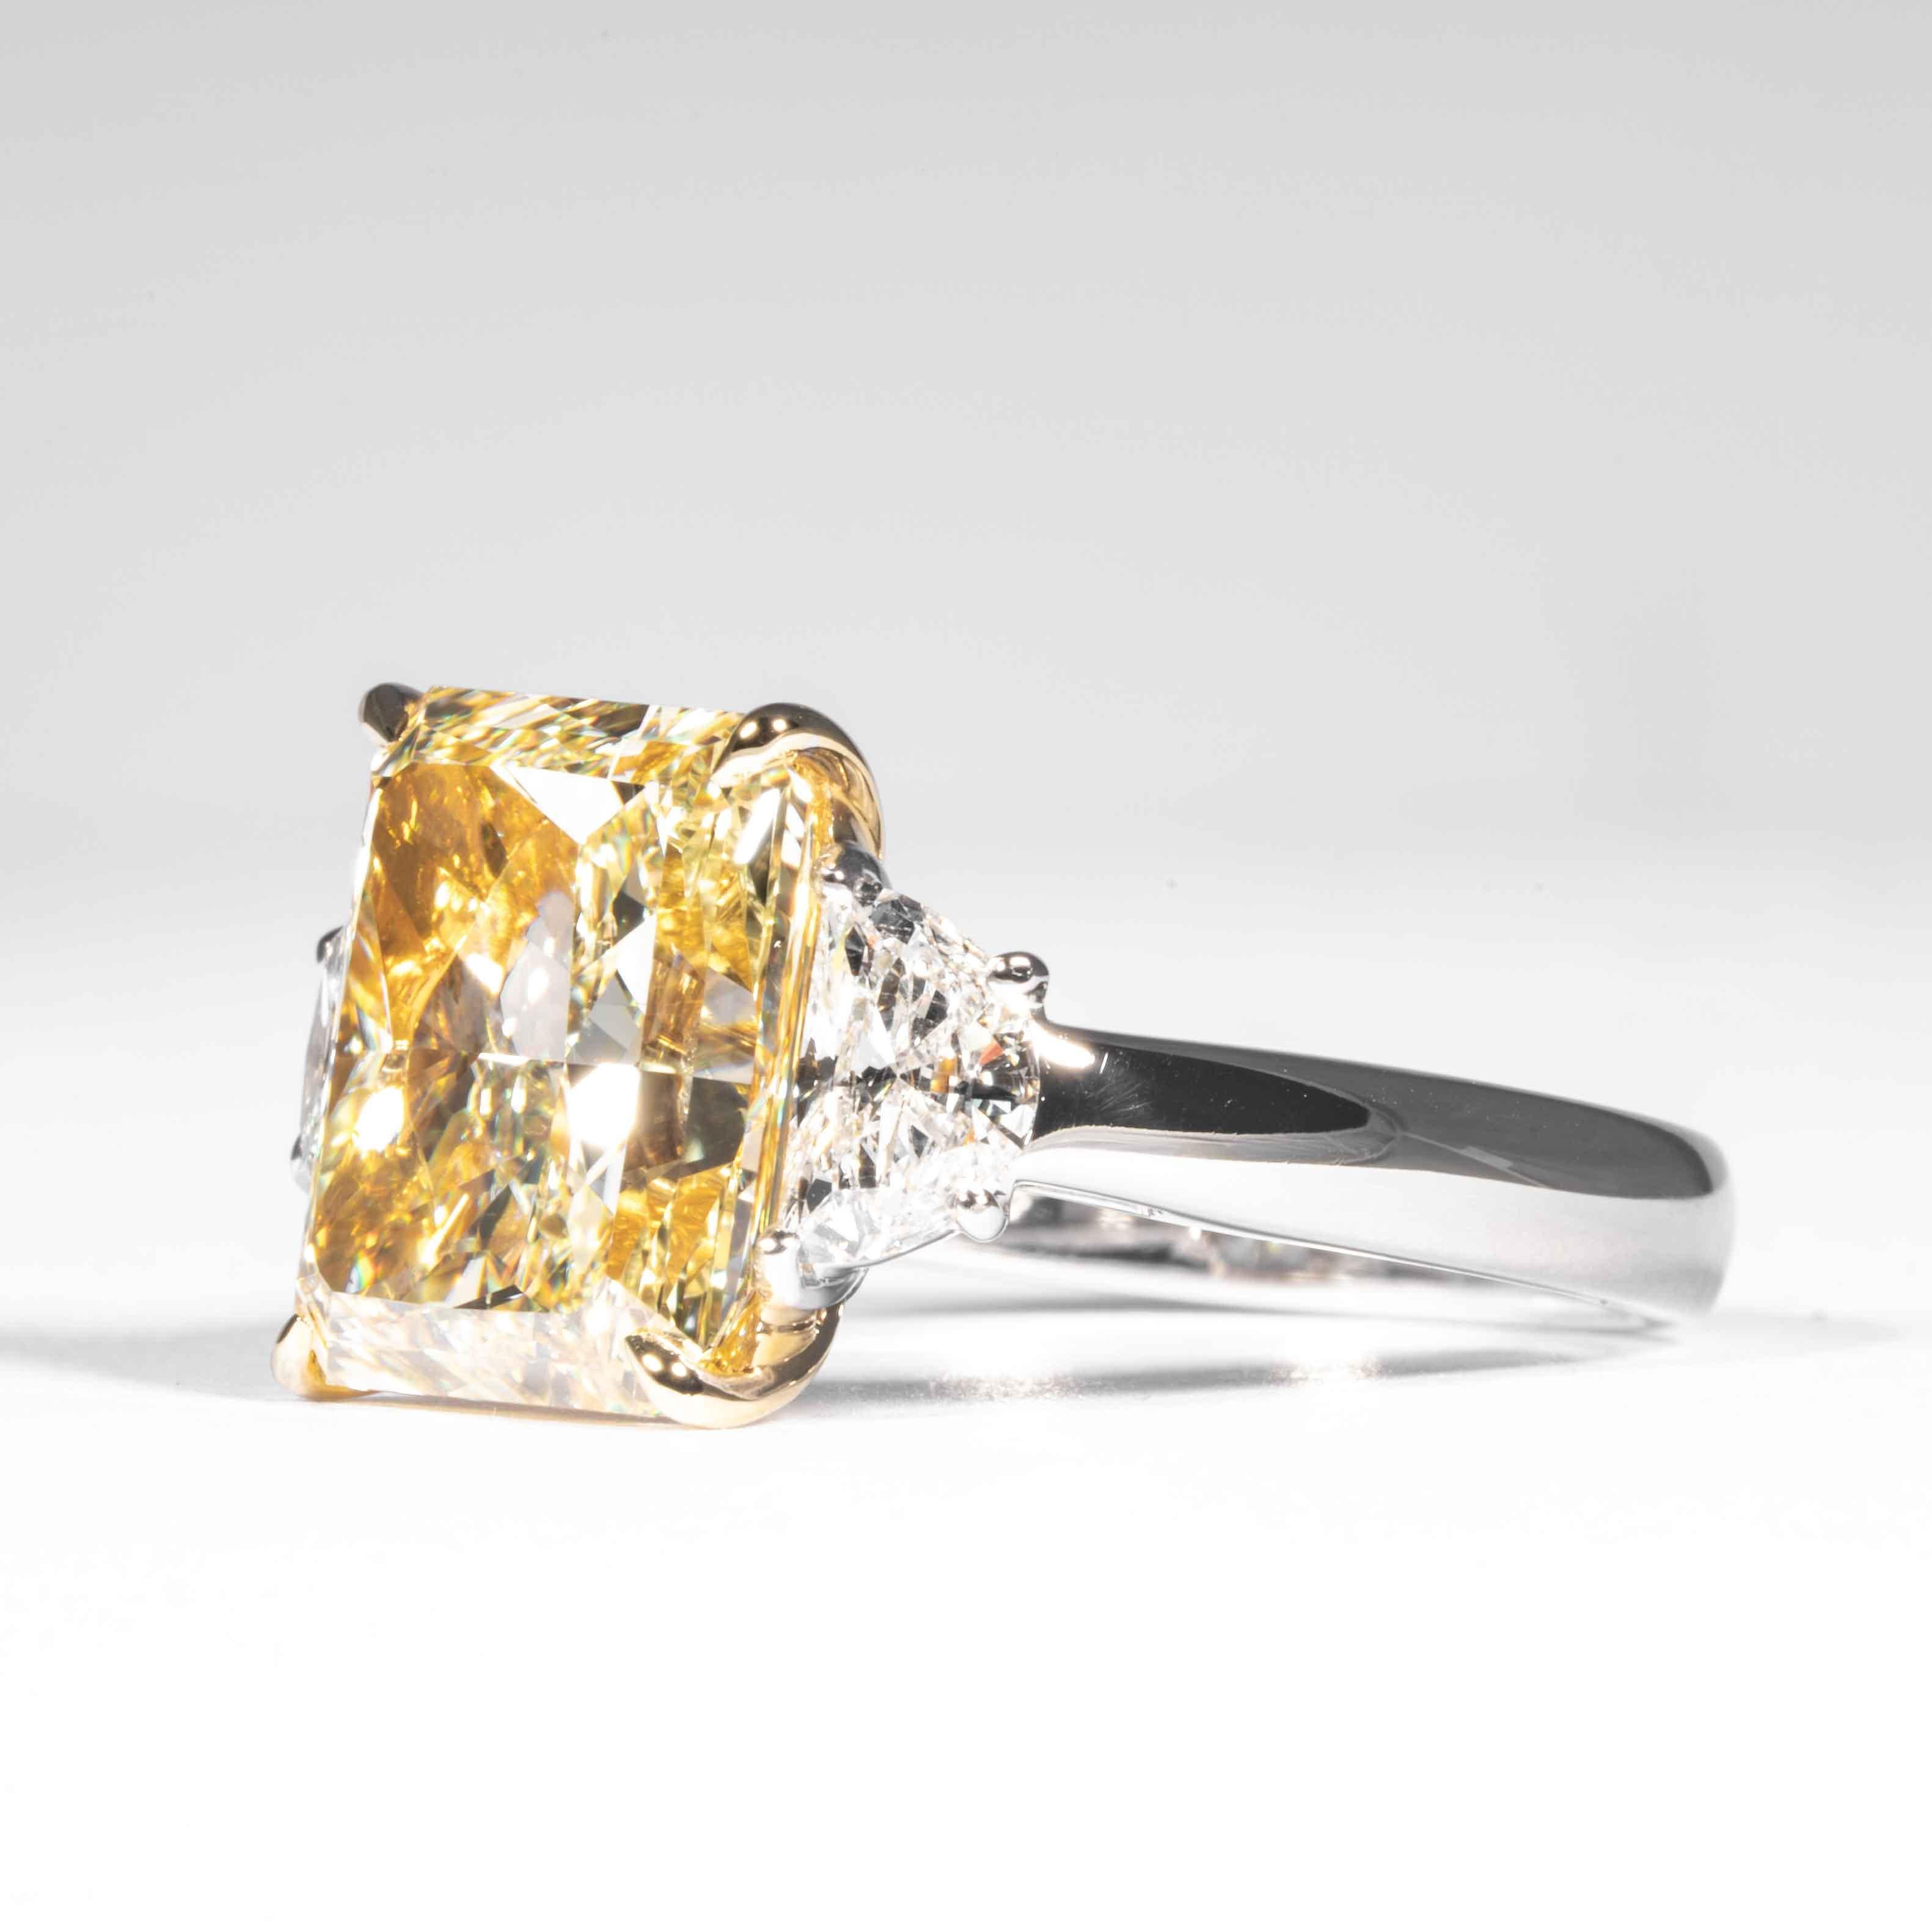 Radiant Cut Shreve, Crump & Low GIA Certified 5.87 Carat Fancy Yellow Radiant Diamond Ring For Sale